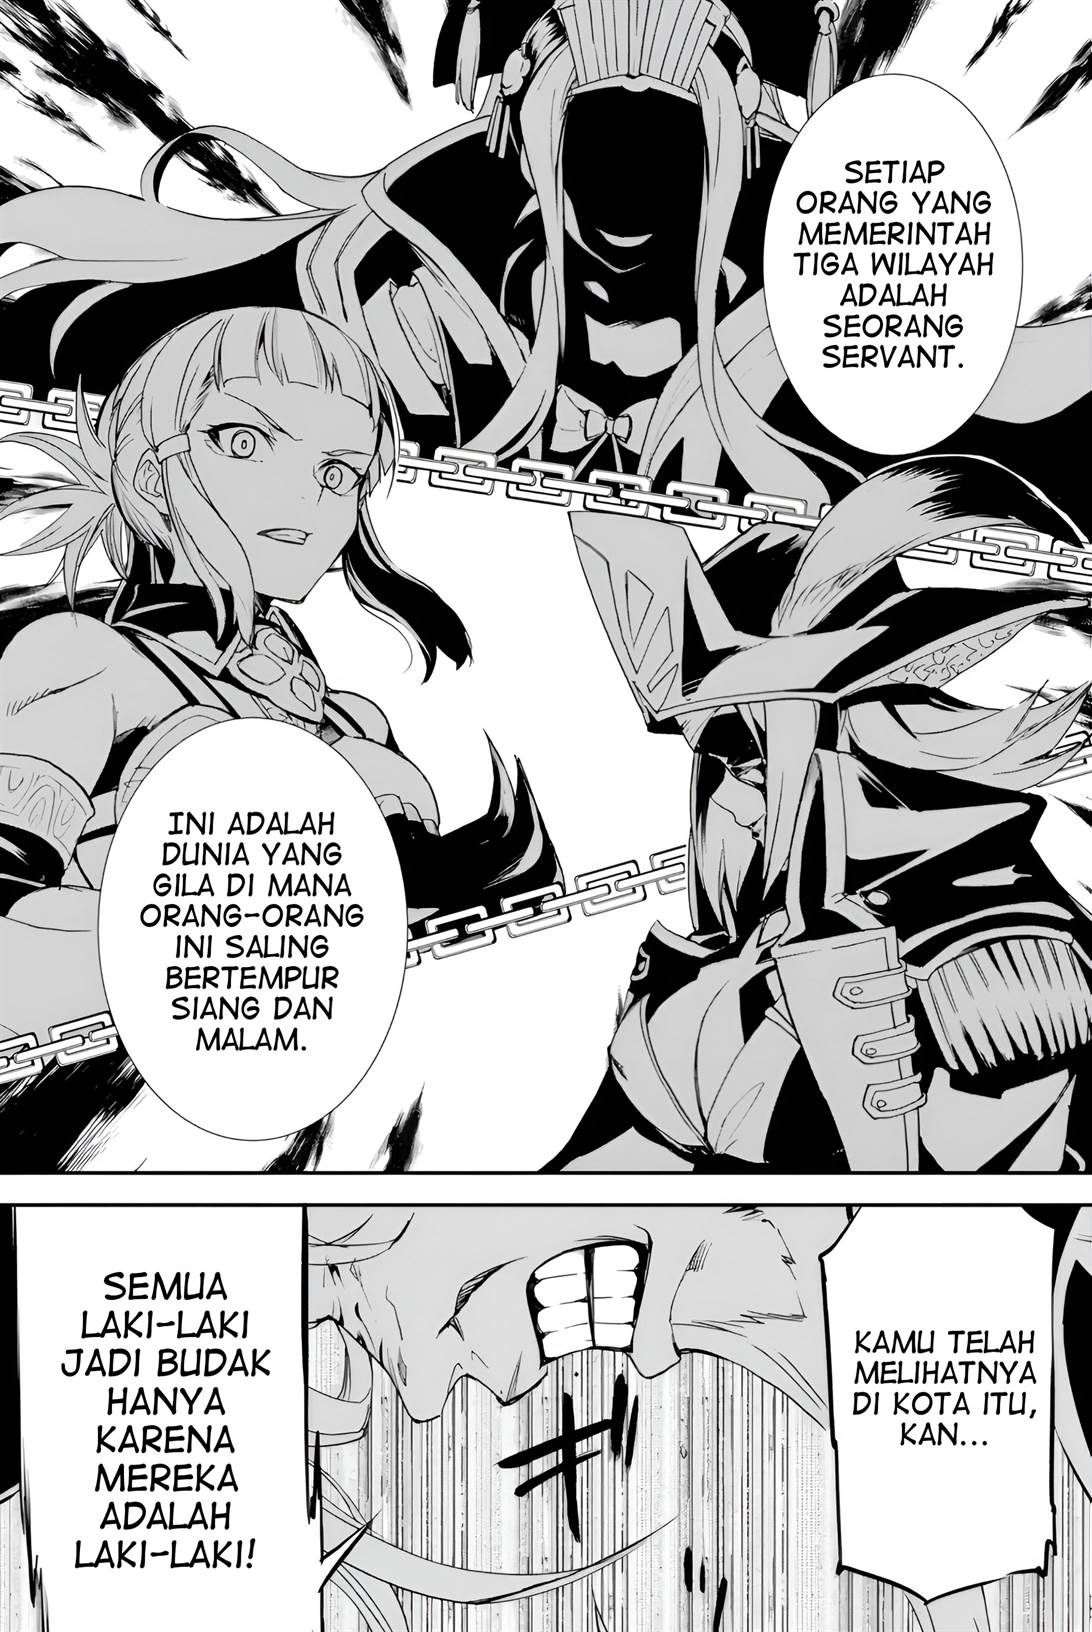 Fate/Grand Order: Epic of Remnant – The Woman of Agarth Chapter 2